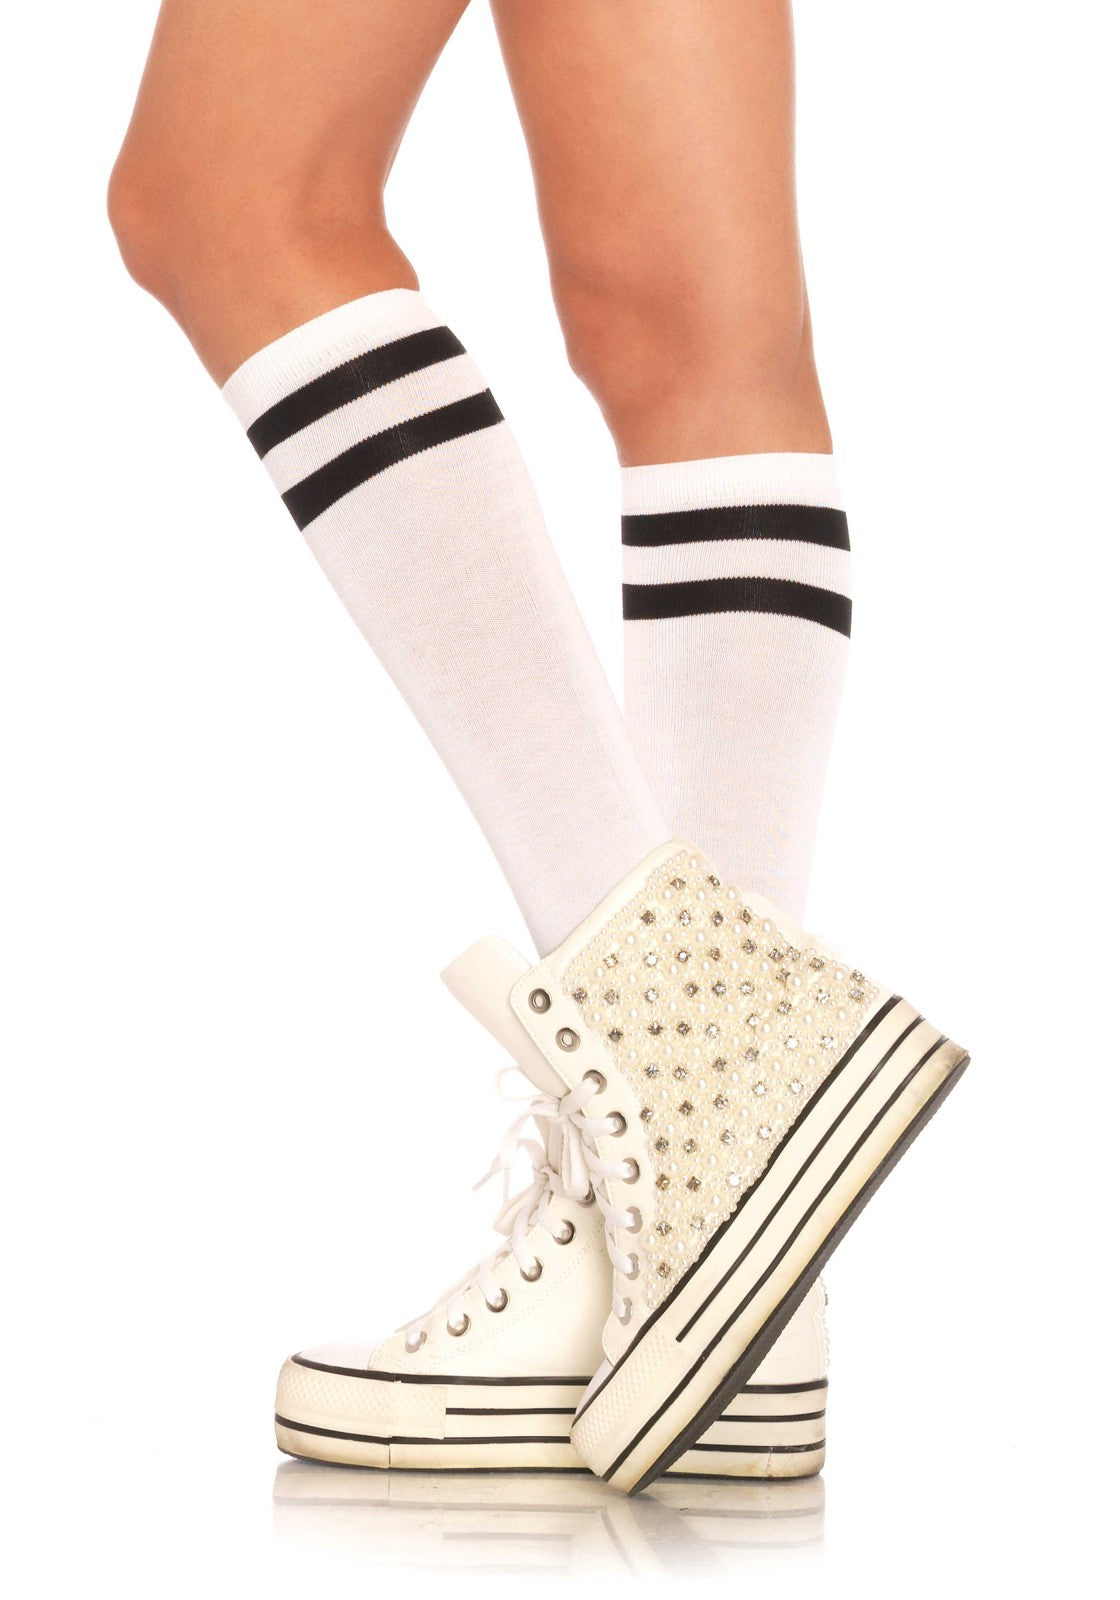 Leg Avenue 5522 Athletic Knee Highs - white sports  style knee-high socks with double black stripe cuff